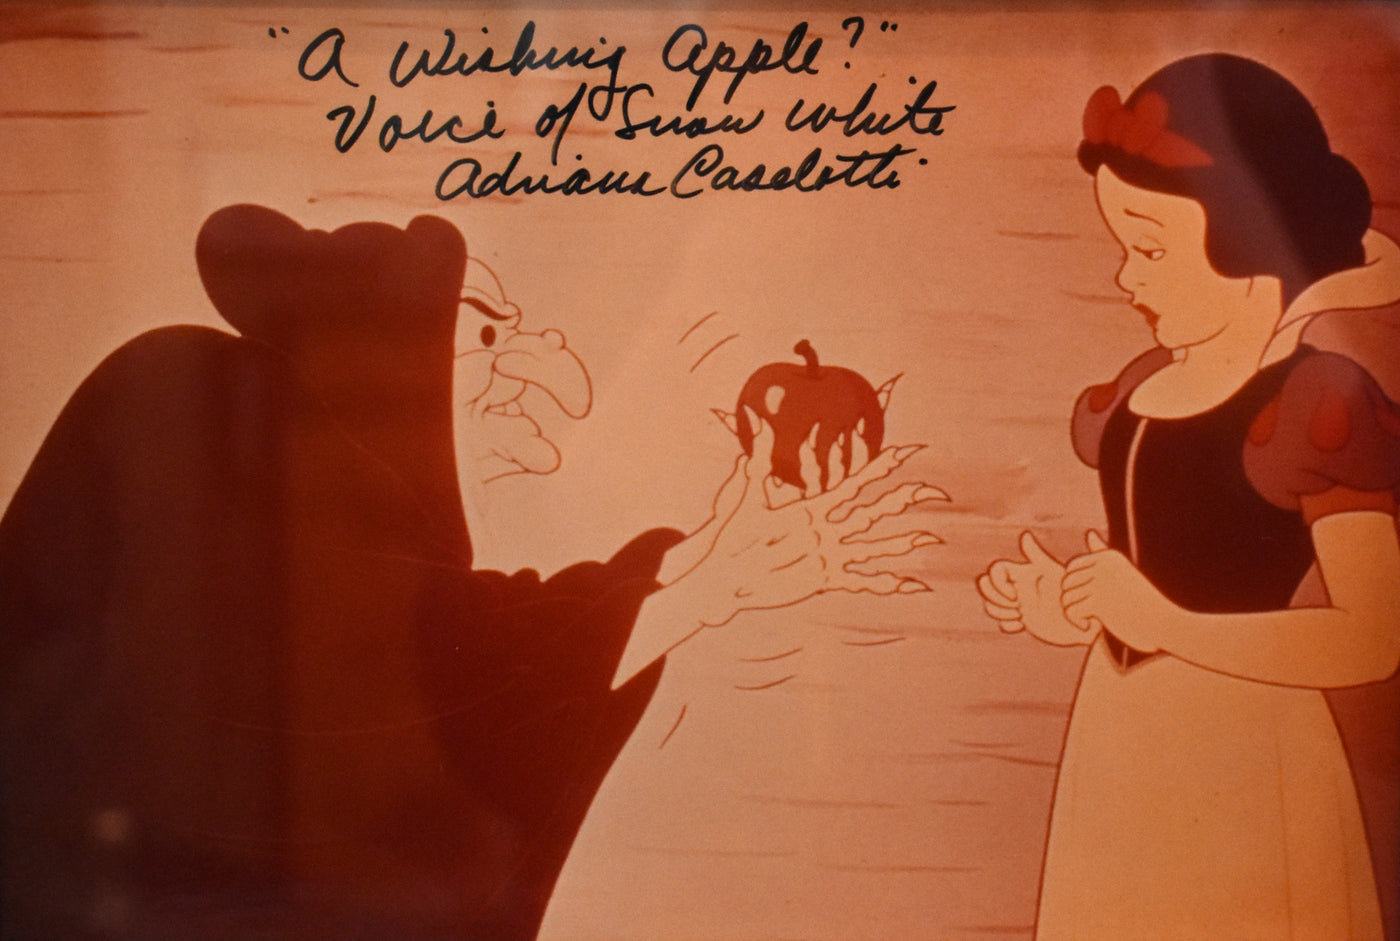 Original Walt Disney Print and Production Drawing Featuring Snow White, Signed by Bill Justice, Milt Neil, and Adriana Caselotti (the Voice of Snow White)